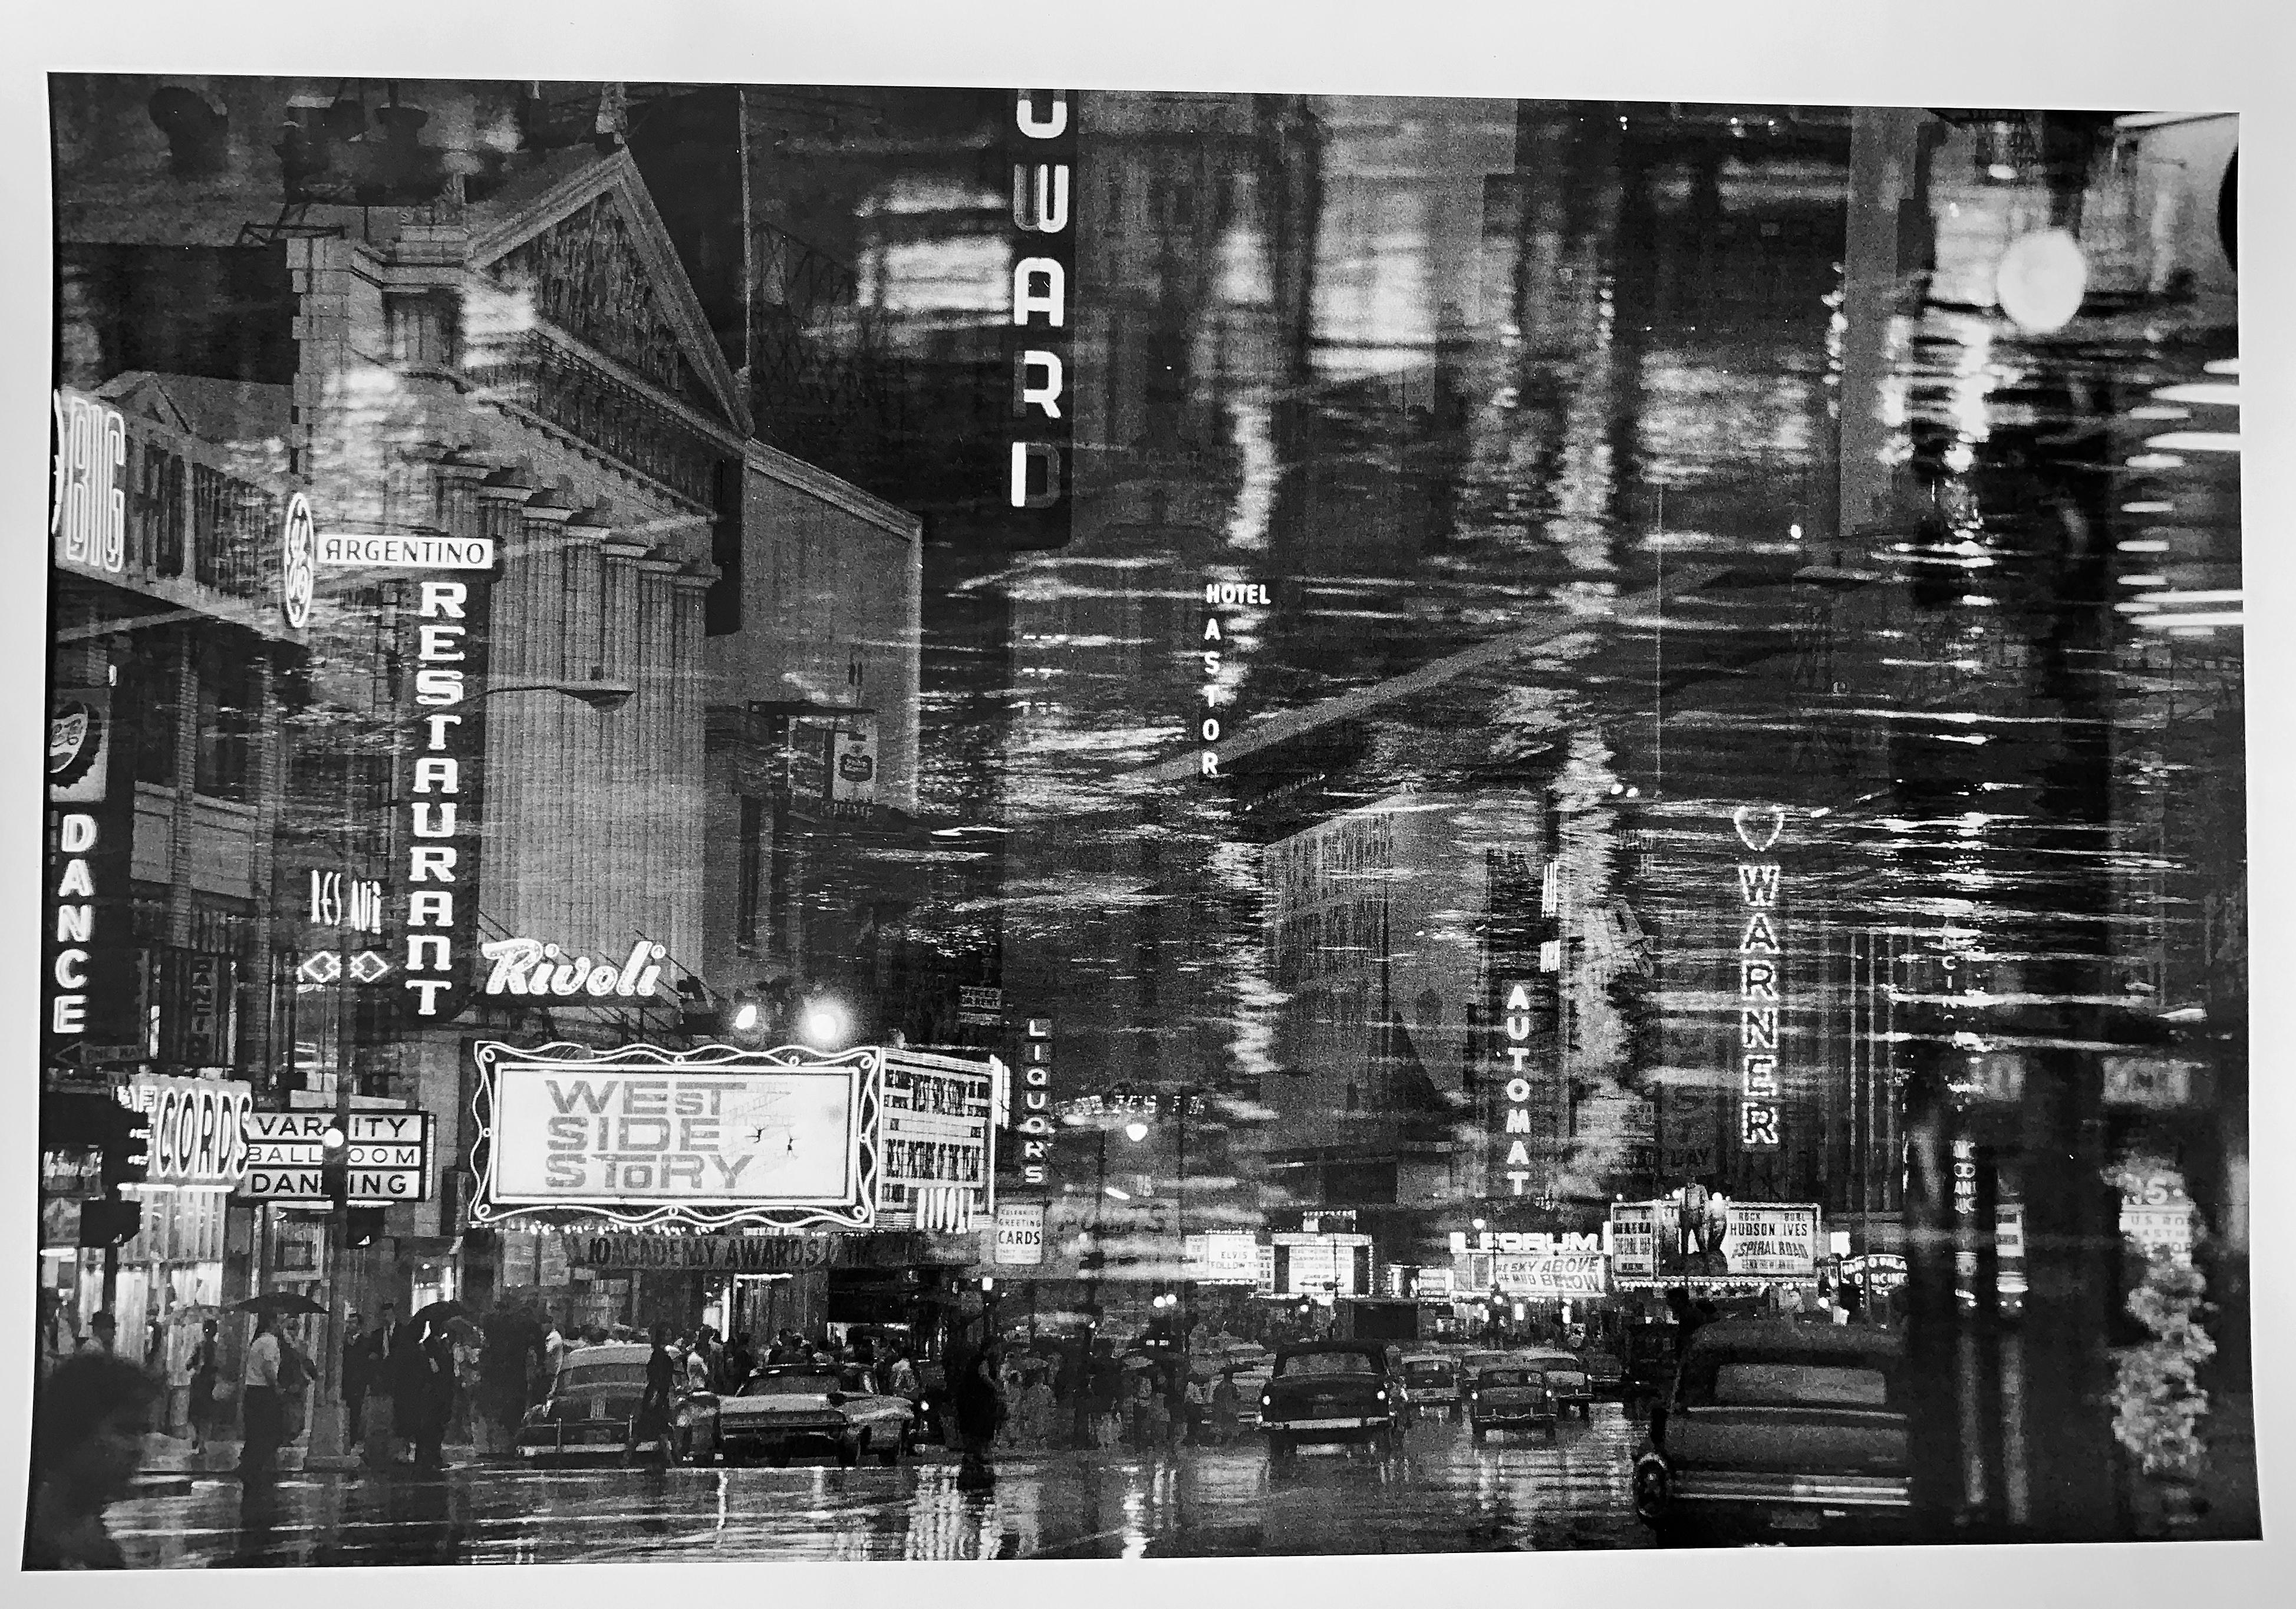 Times Square, New York City, Black and White Abstract Night Photography 1950s